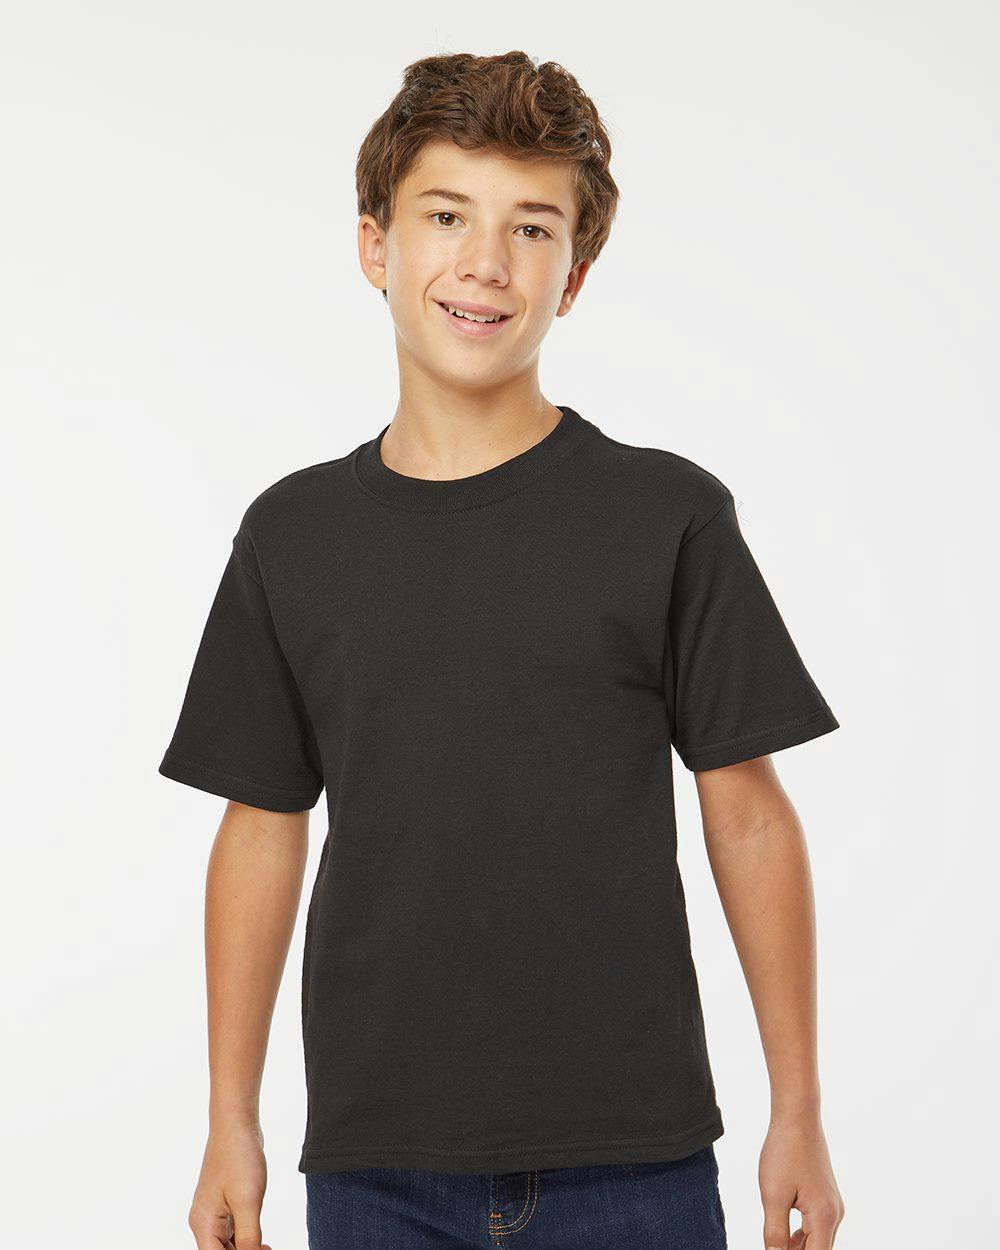 Image for Youth Gold Soft Touch T-Shirt - 4850